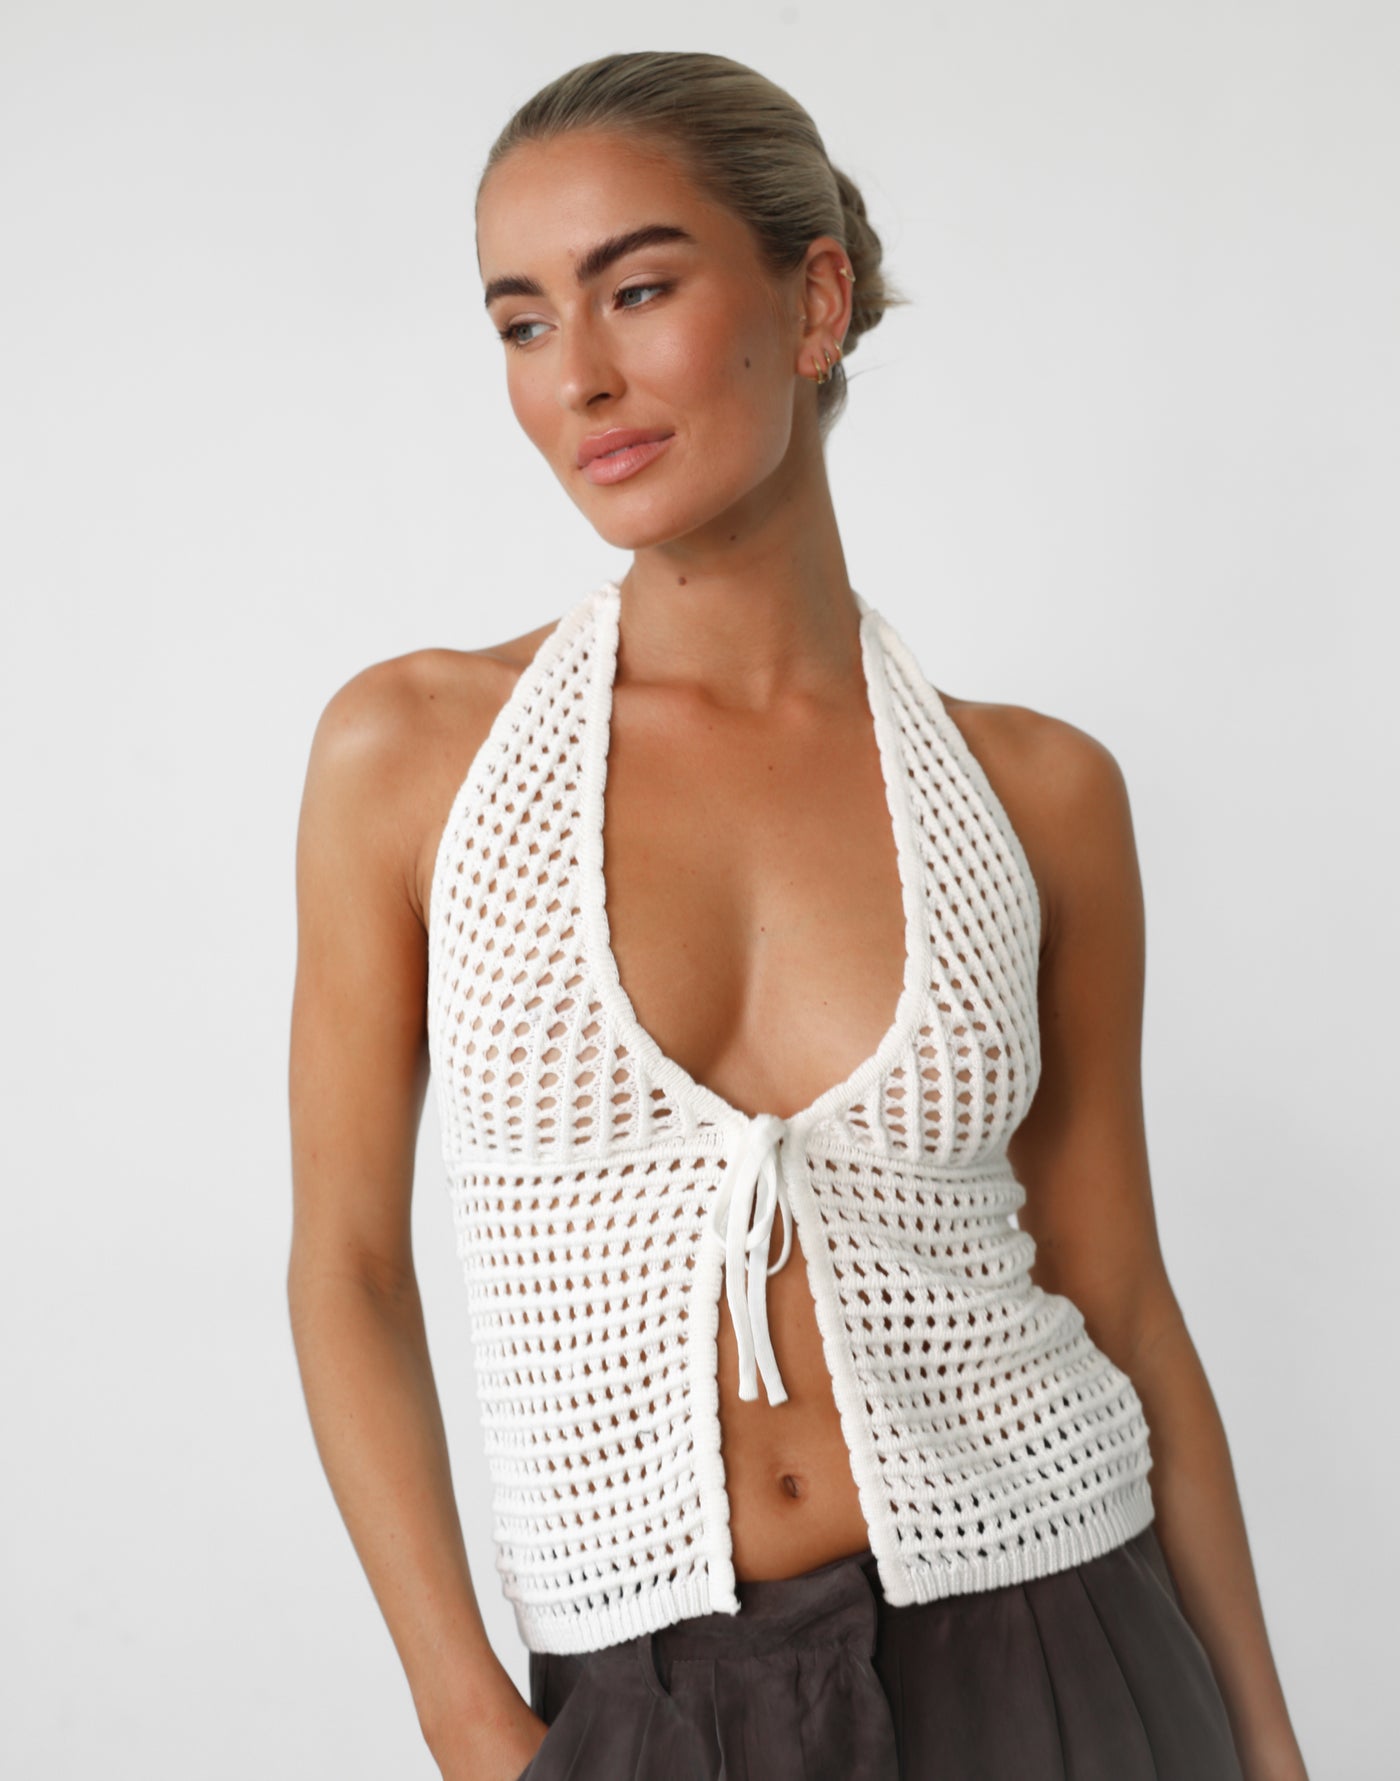 Wild Soul Crochet Top (White) - V-neck Tie-up Top - Women's Top - Charcoal Clothing